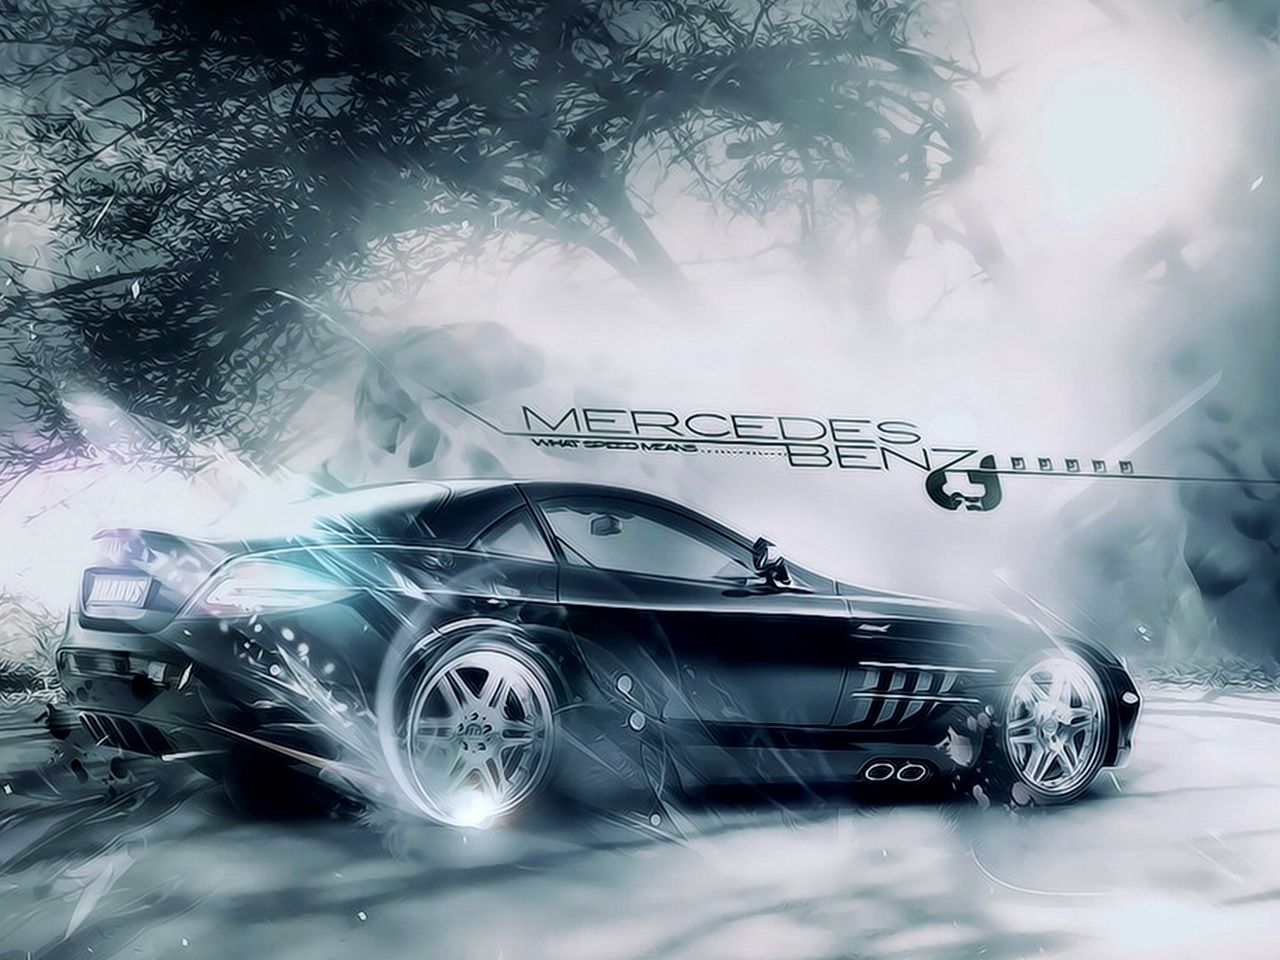 benz black hd wallpaper free download black painted cars wallpapers